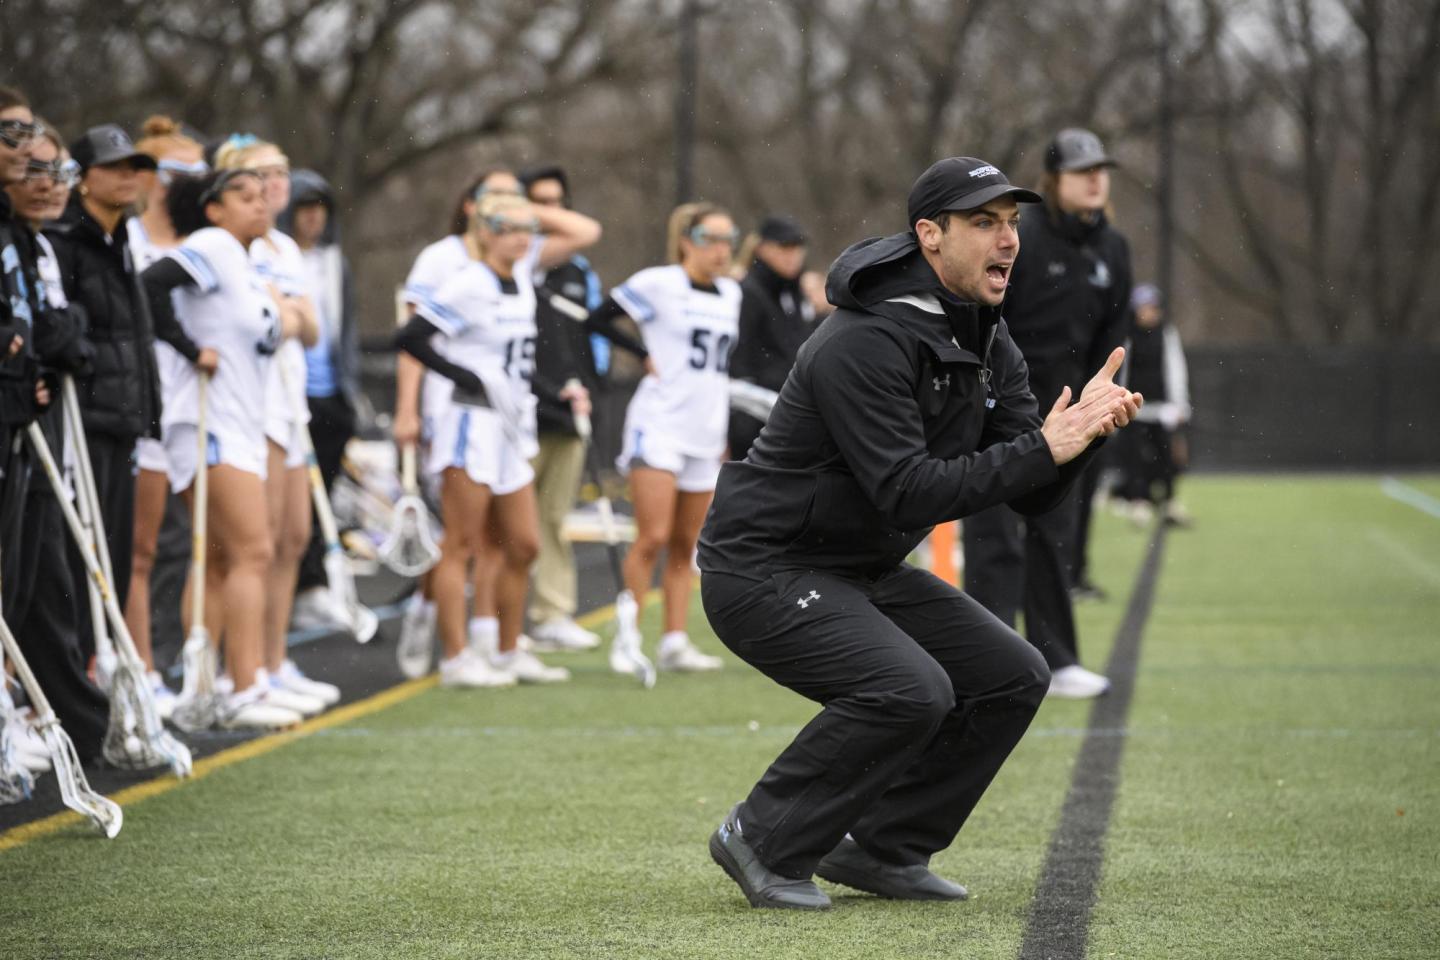 Coach Tim McCormack crouches and claps his hands on the sidelines of a women's lacrosse game.